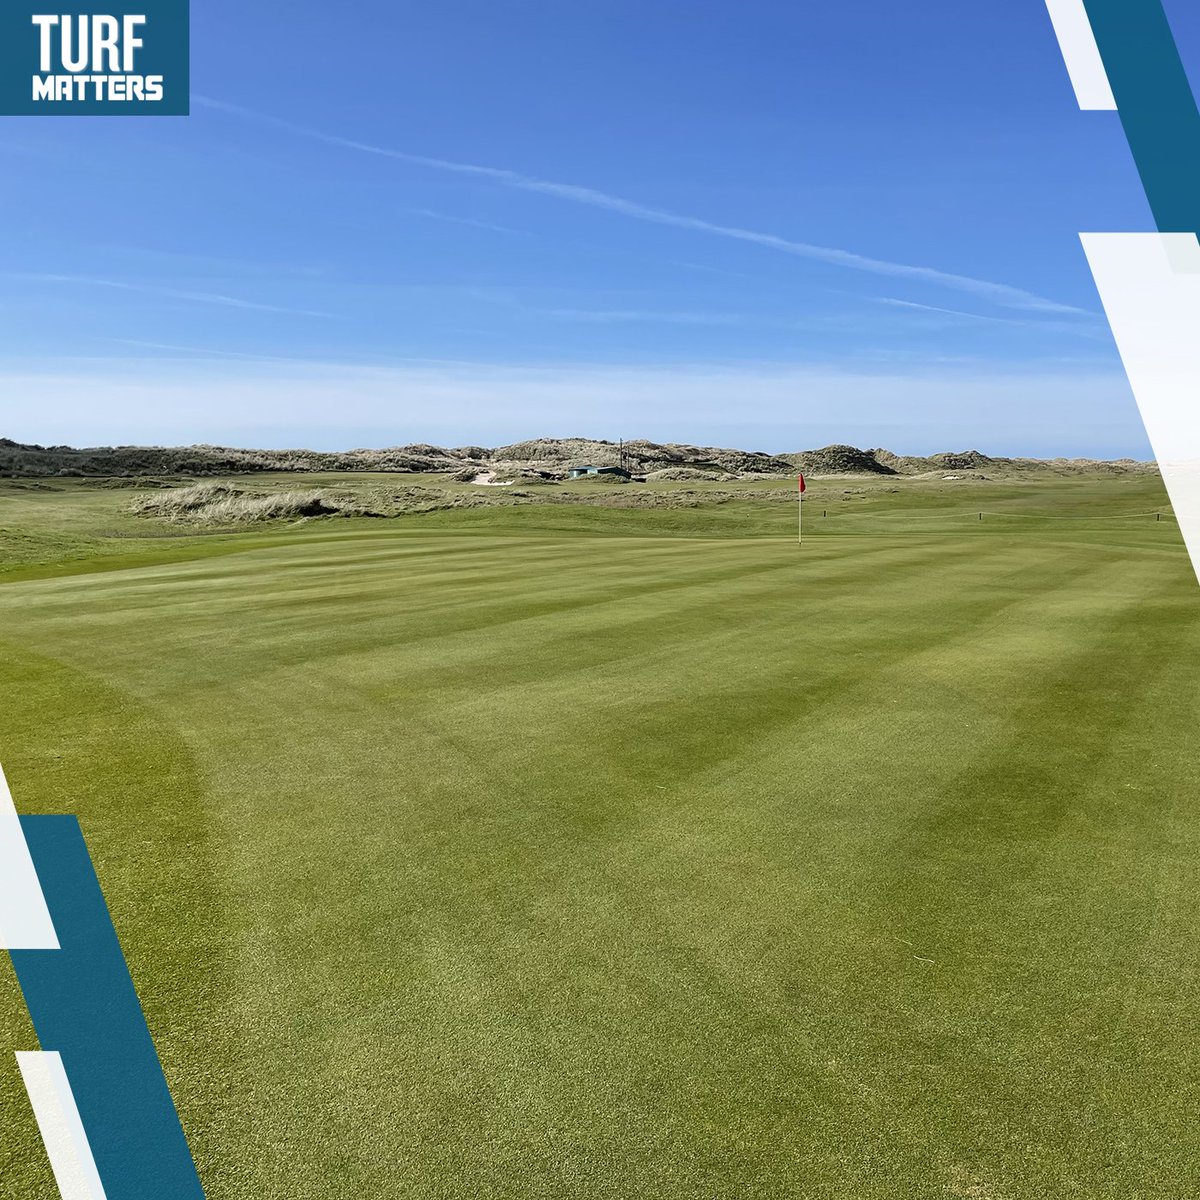 #TurfNews Aberdovey Golf Club stands as a testament to the beauty and challenges of links golf. Overseeing this course is Nigel Green, whose dedication to excellence has been furthered by innovative solutions from @AgrovistaAMNTY. Read more 👉 turfmatters.co.uk/the-attraxor-a…